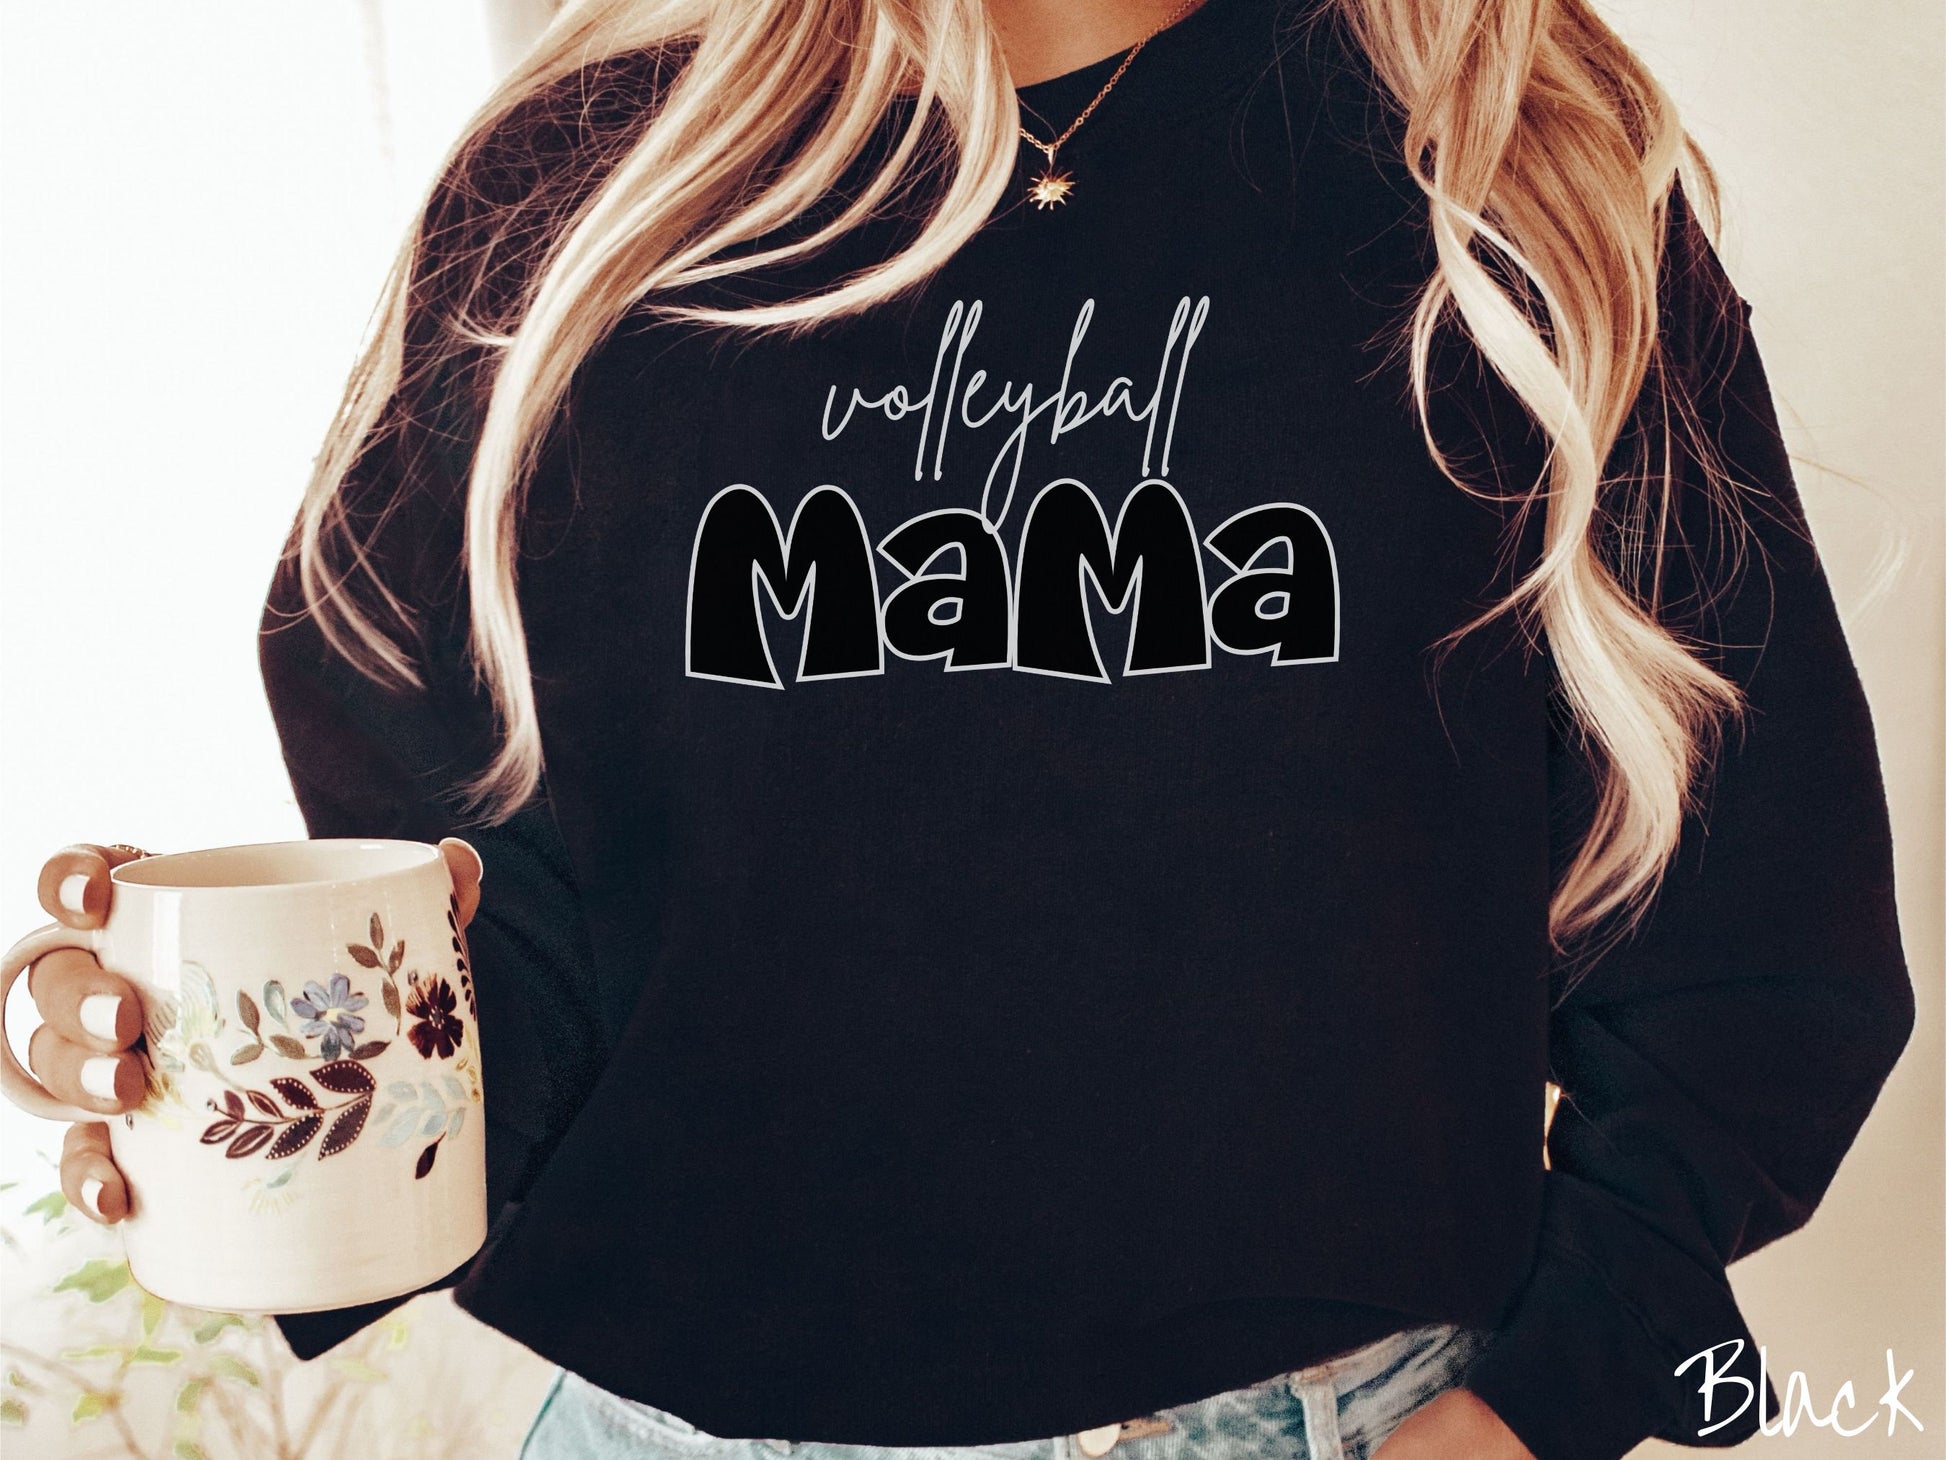 A woman wearing a cute, vintage black colored sweatshirt with the word volleyball across the front in white, undercase cursive writing. Below that is the word Mama in large, black font.